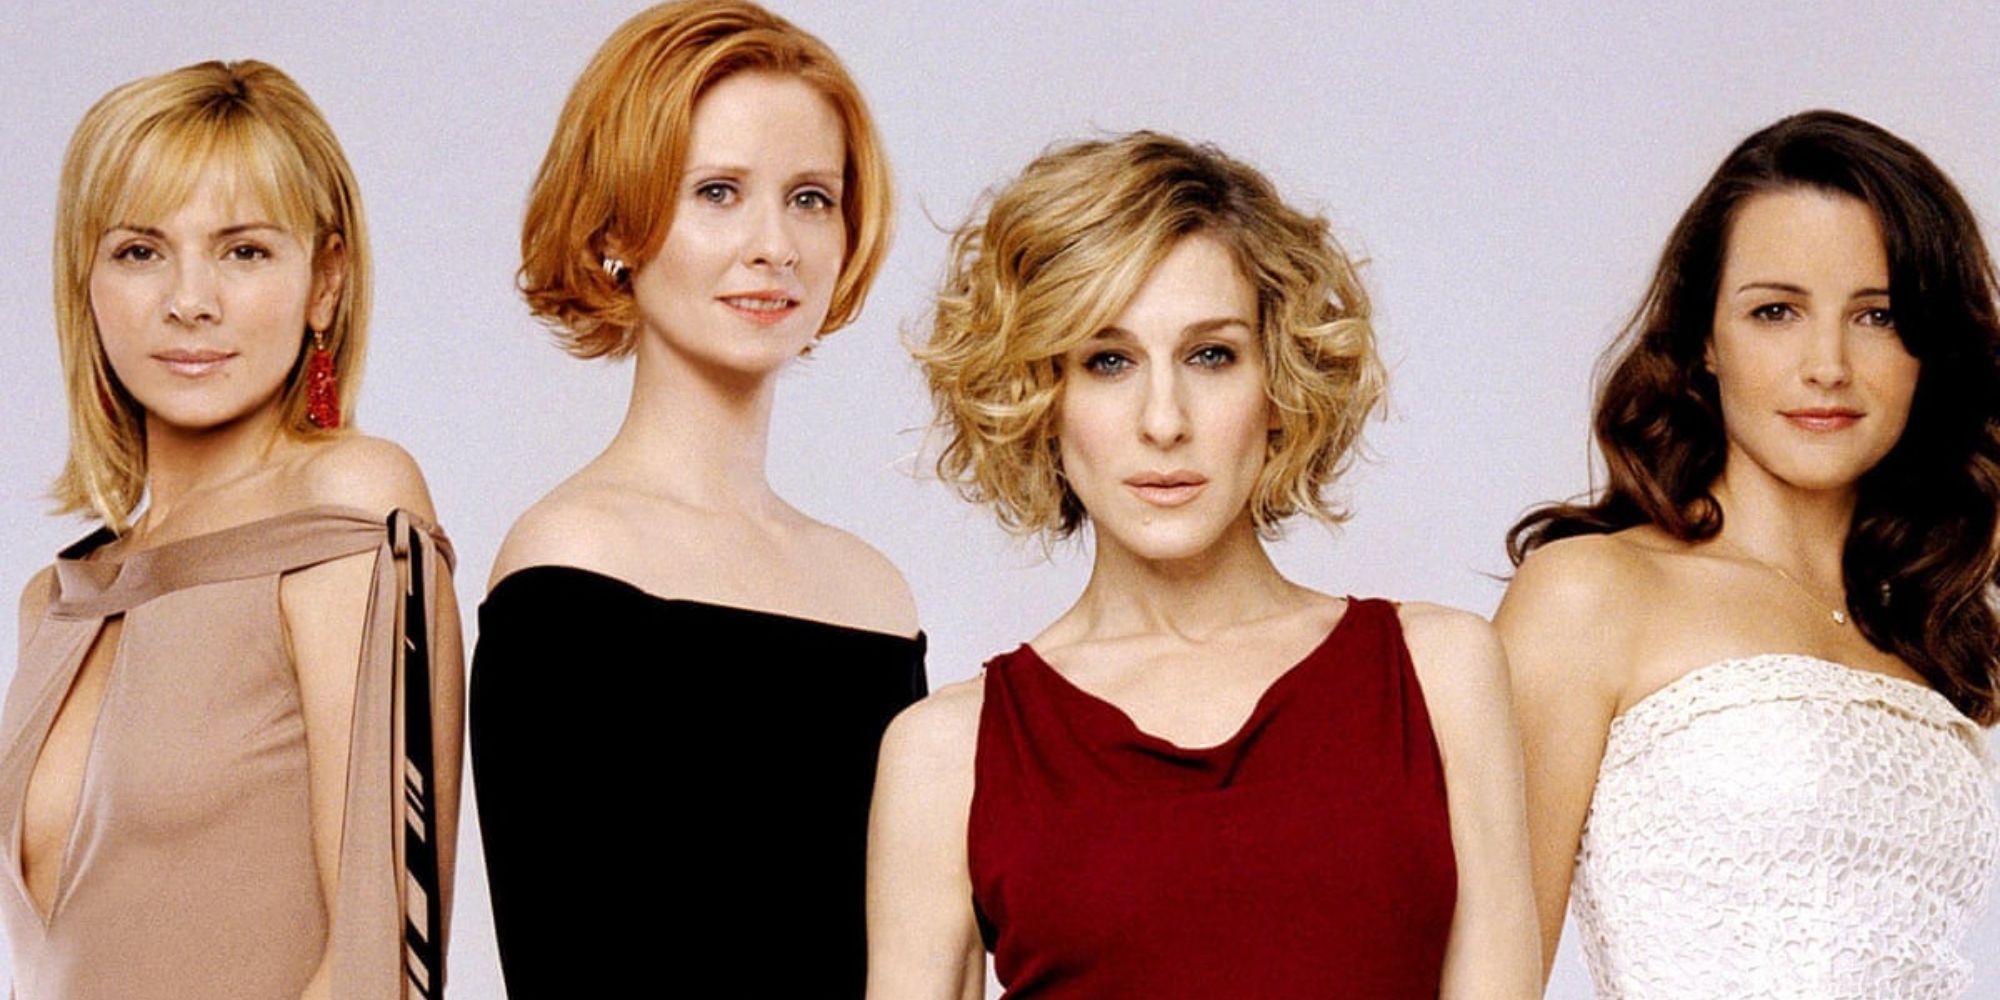 The protagonists of Sex And The City in a promo photo for the show.